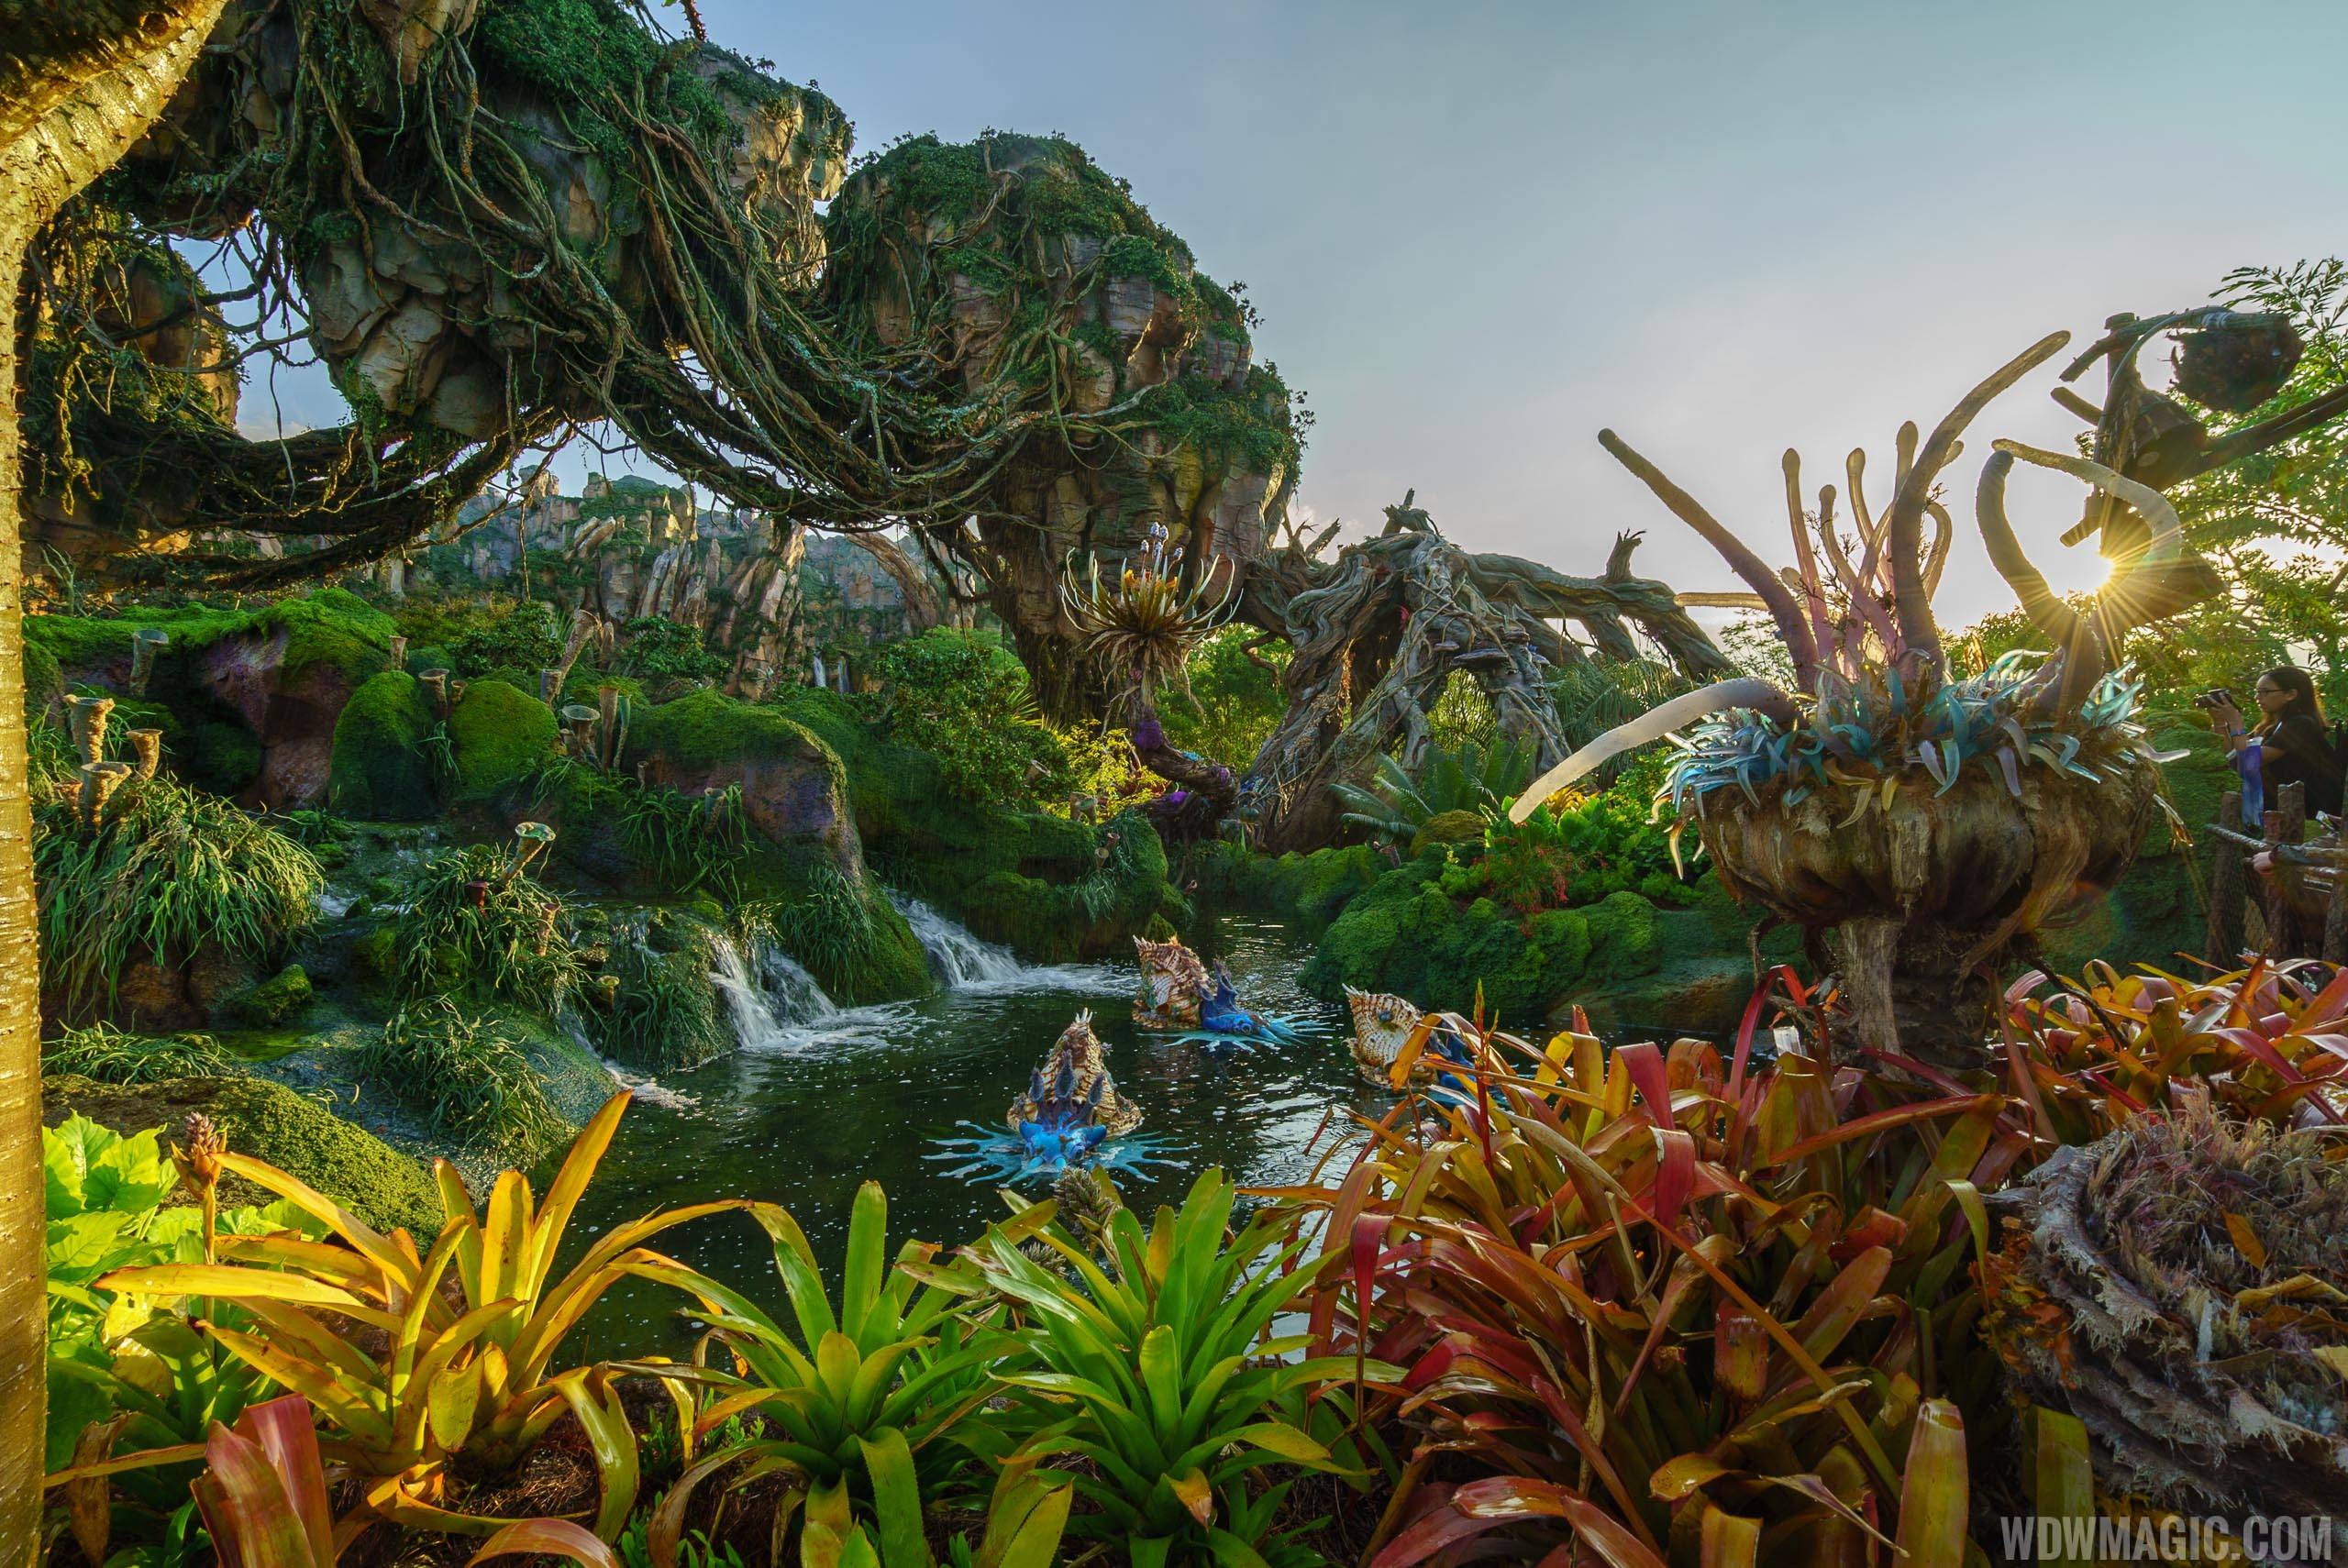 Event attendees will be able to experience Pandora after dark